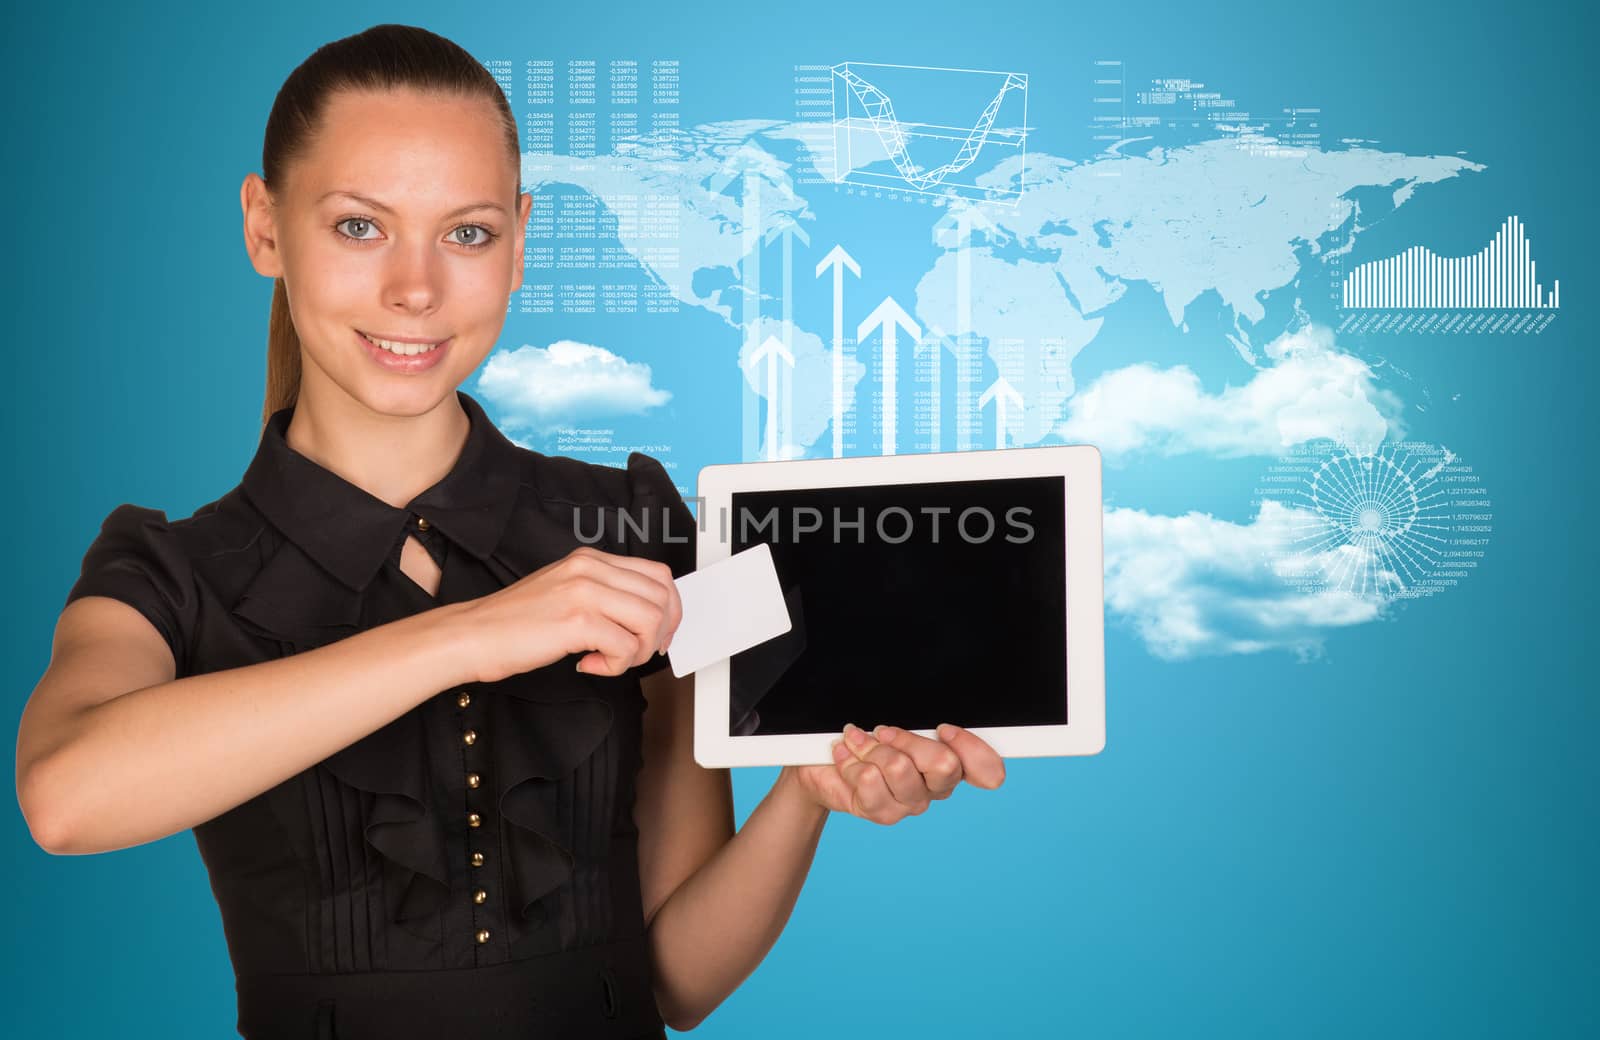 Beautiful businesswoman holding blank tablet PC and blank business card in front of PC screen. World map, clouds and hi-tech graphs with various data as backdrop